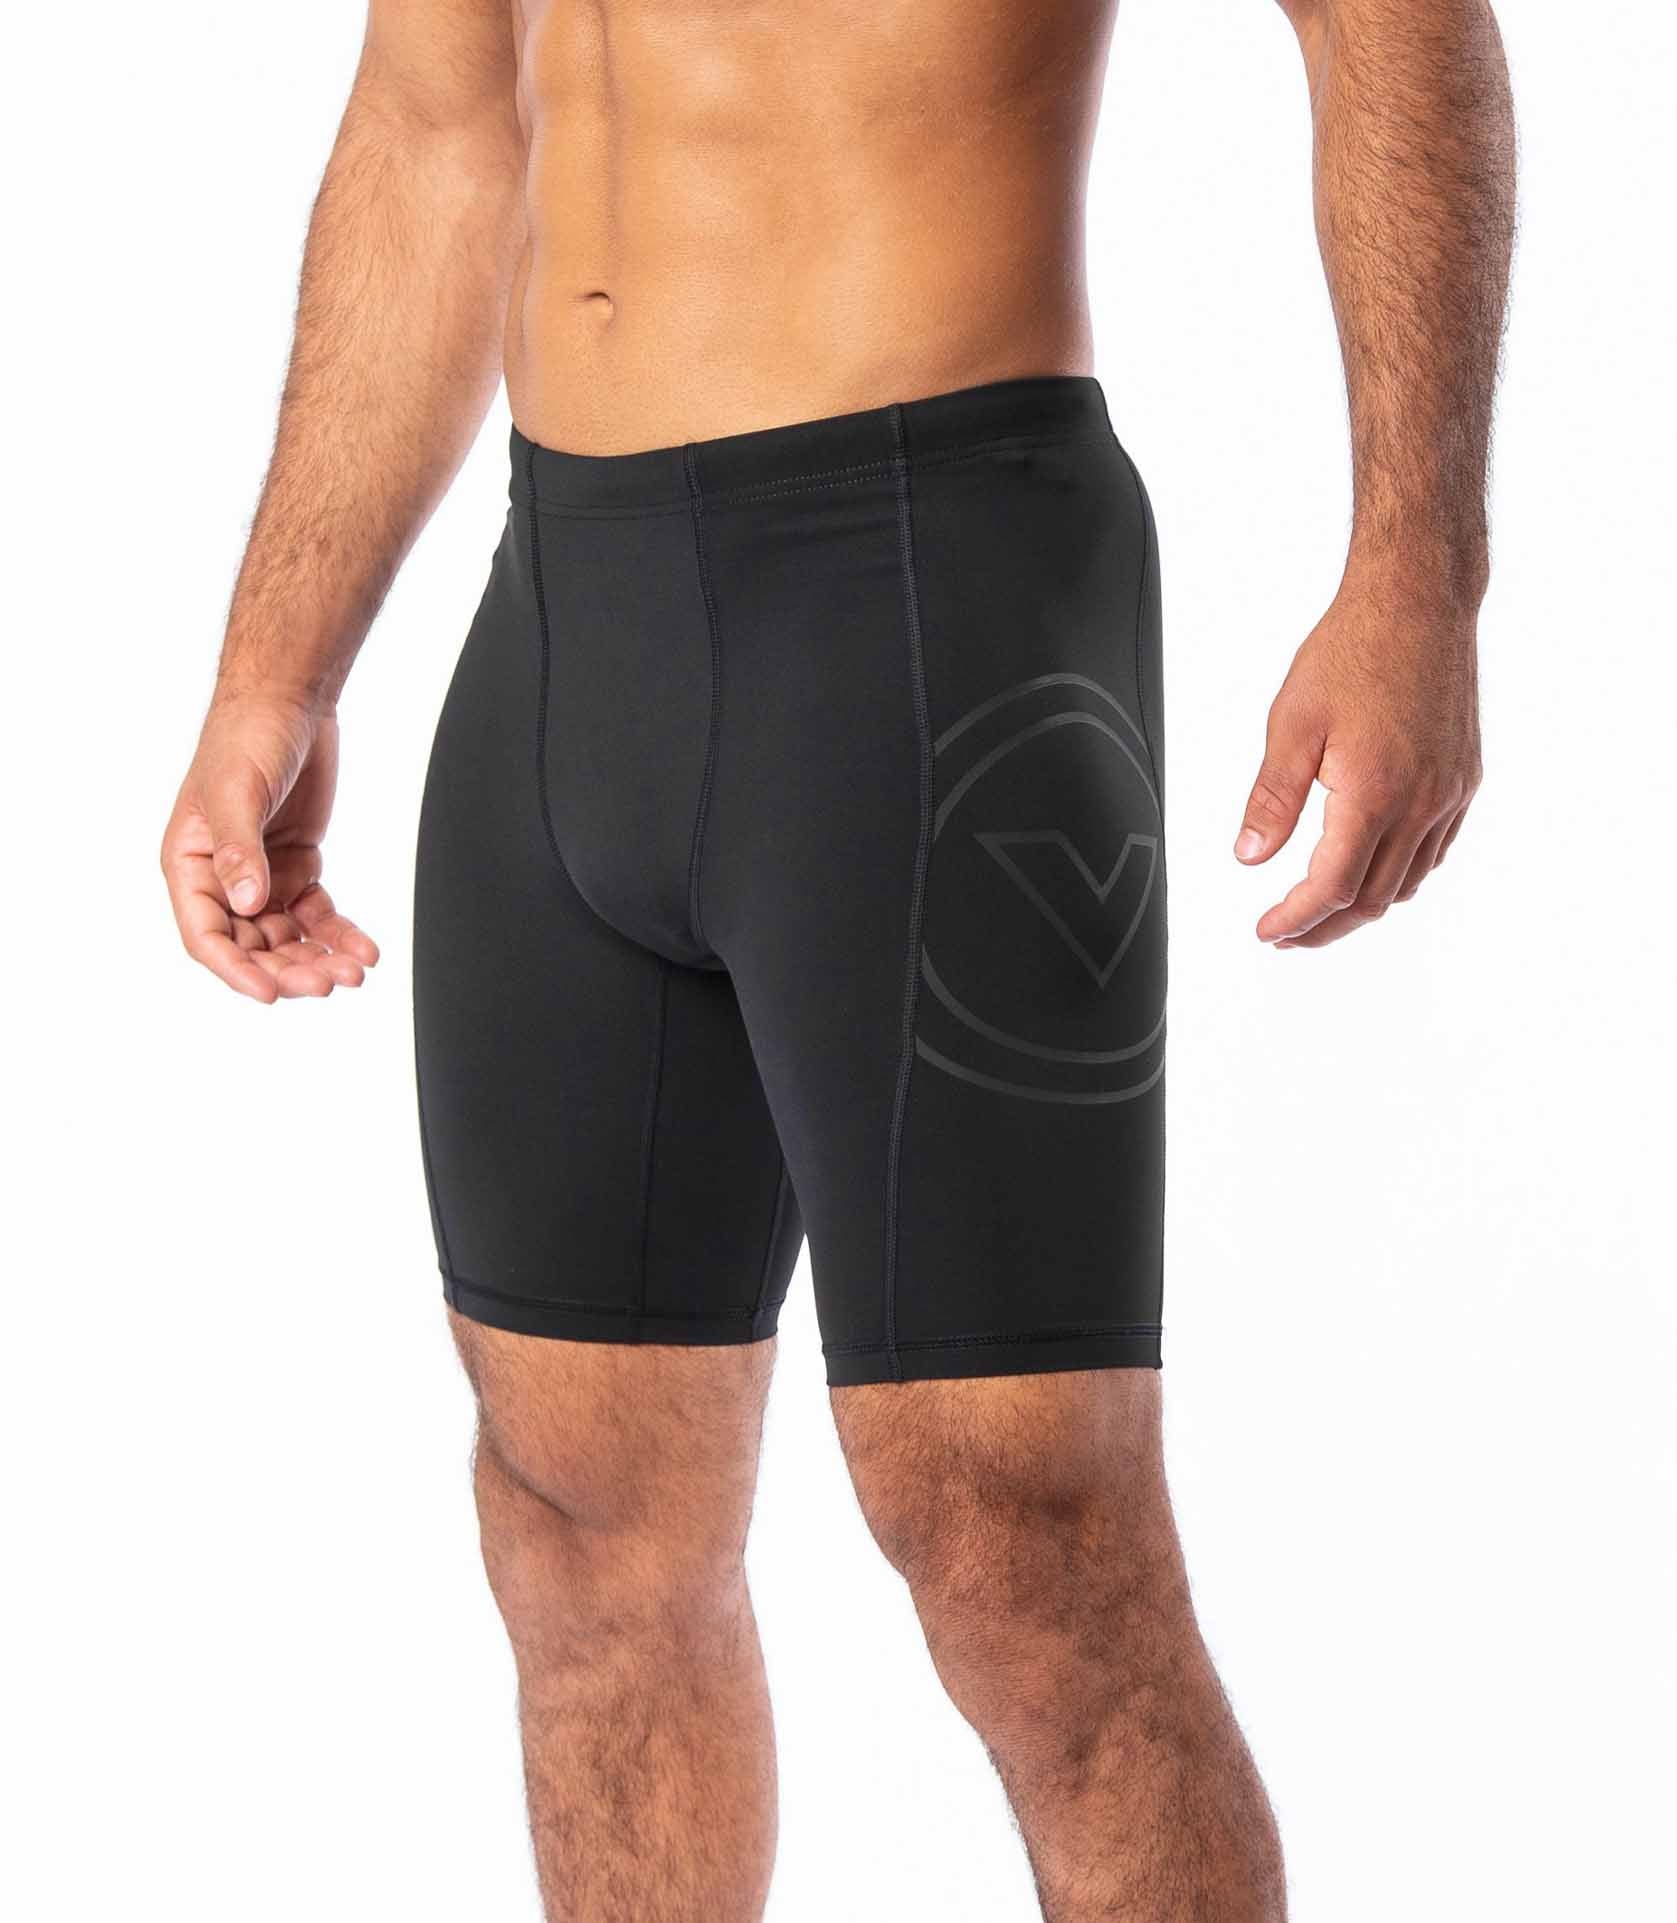 New Shorts and Compression Gear from Virus Intl - Delta Grade